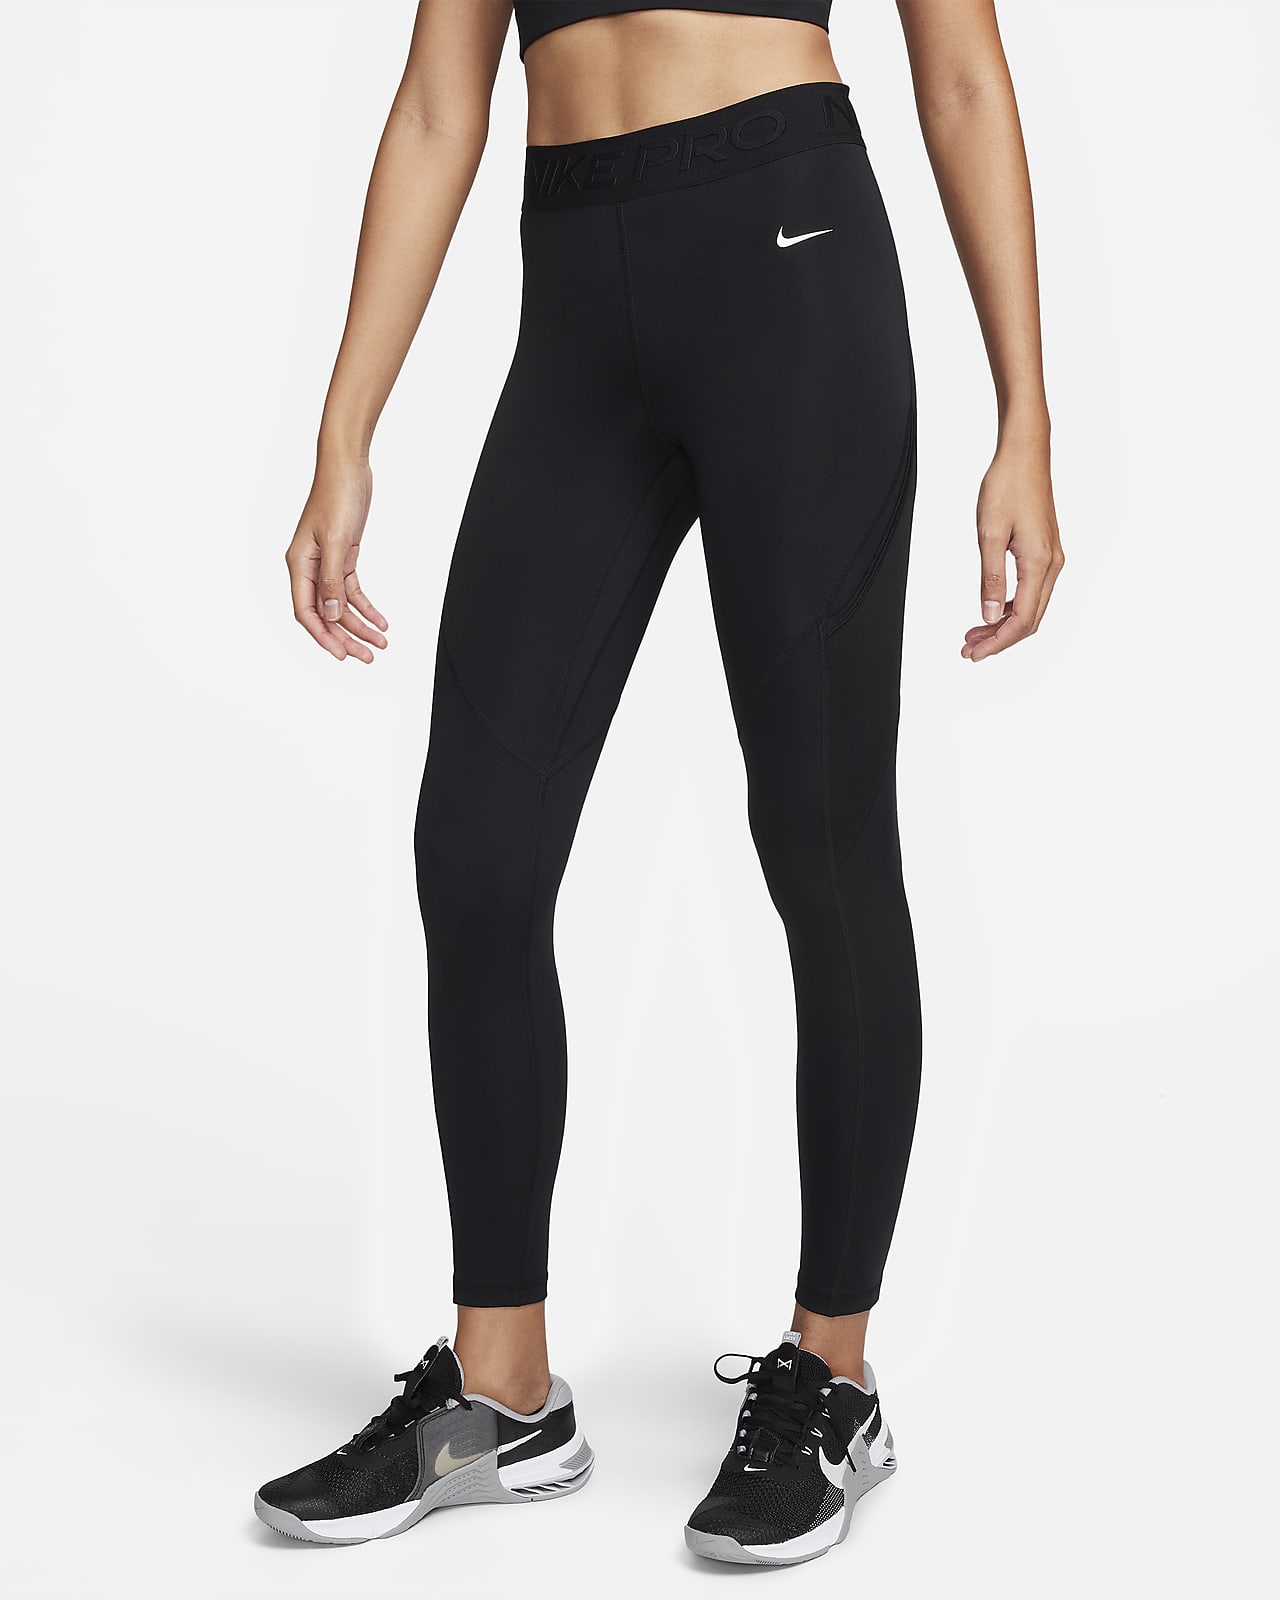 Nike Universa Women's Medium-Support High-Waisted 7/8 Leggings with Pockets  (X-Small, Black) at Amazon Women's Clothing store